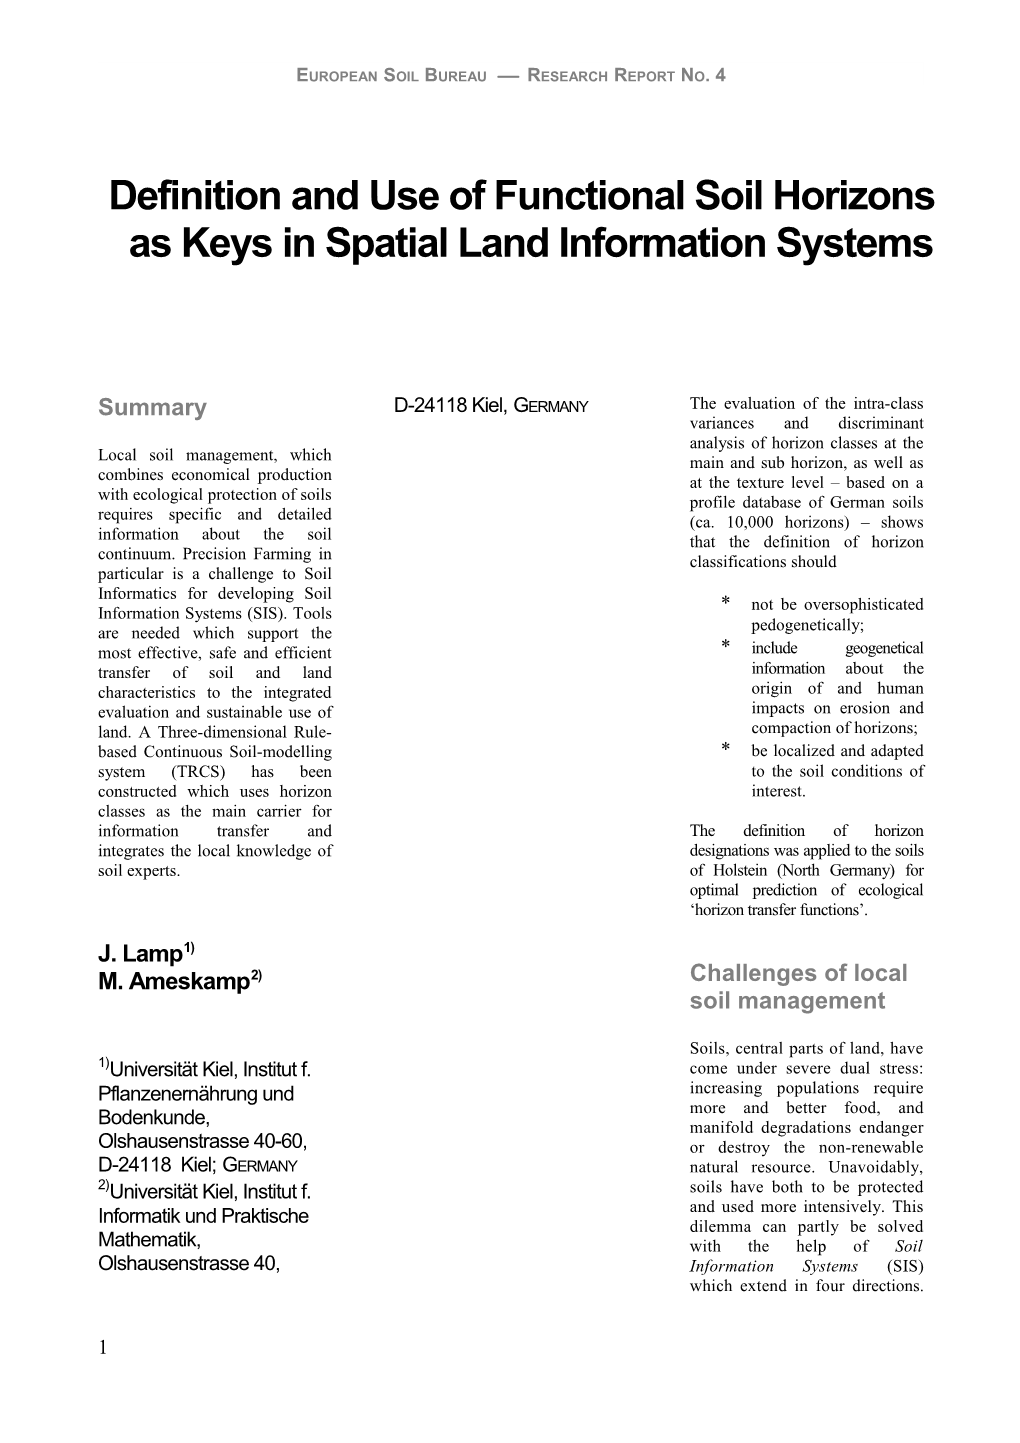 Definition and Use of Functional Soil Horizons As Keys in Spatial Land Information Systems